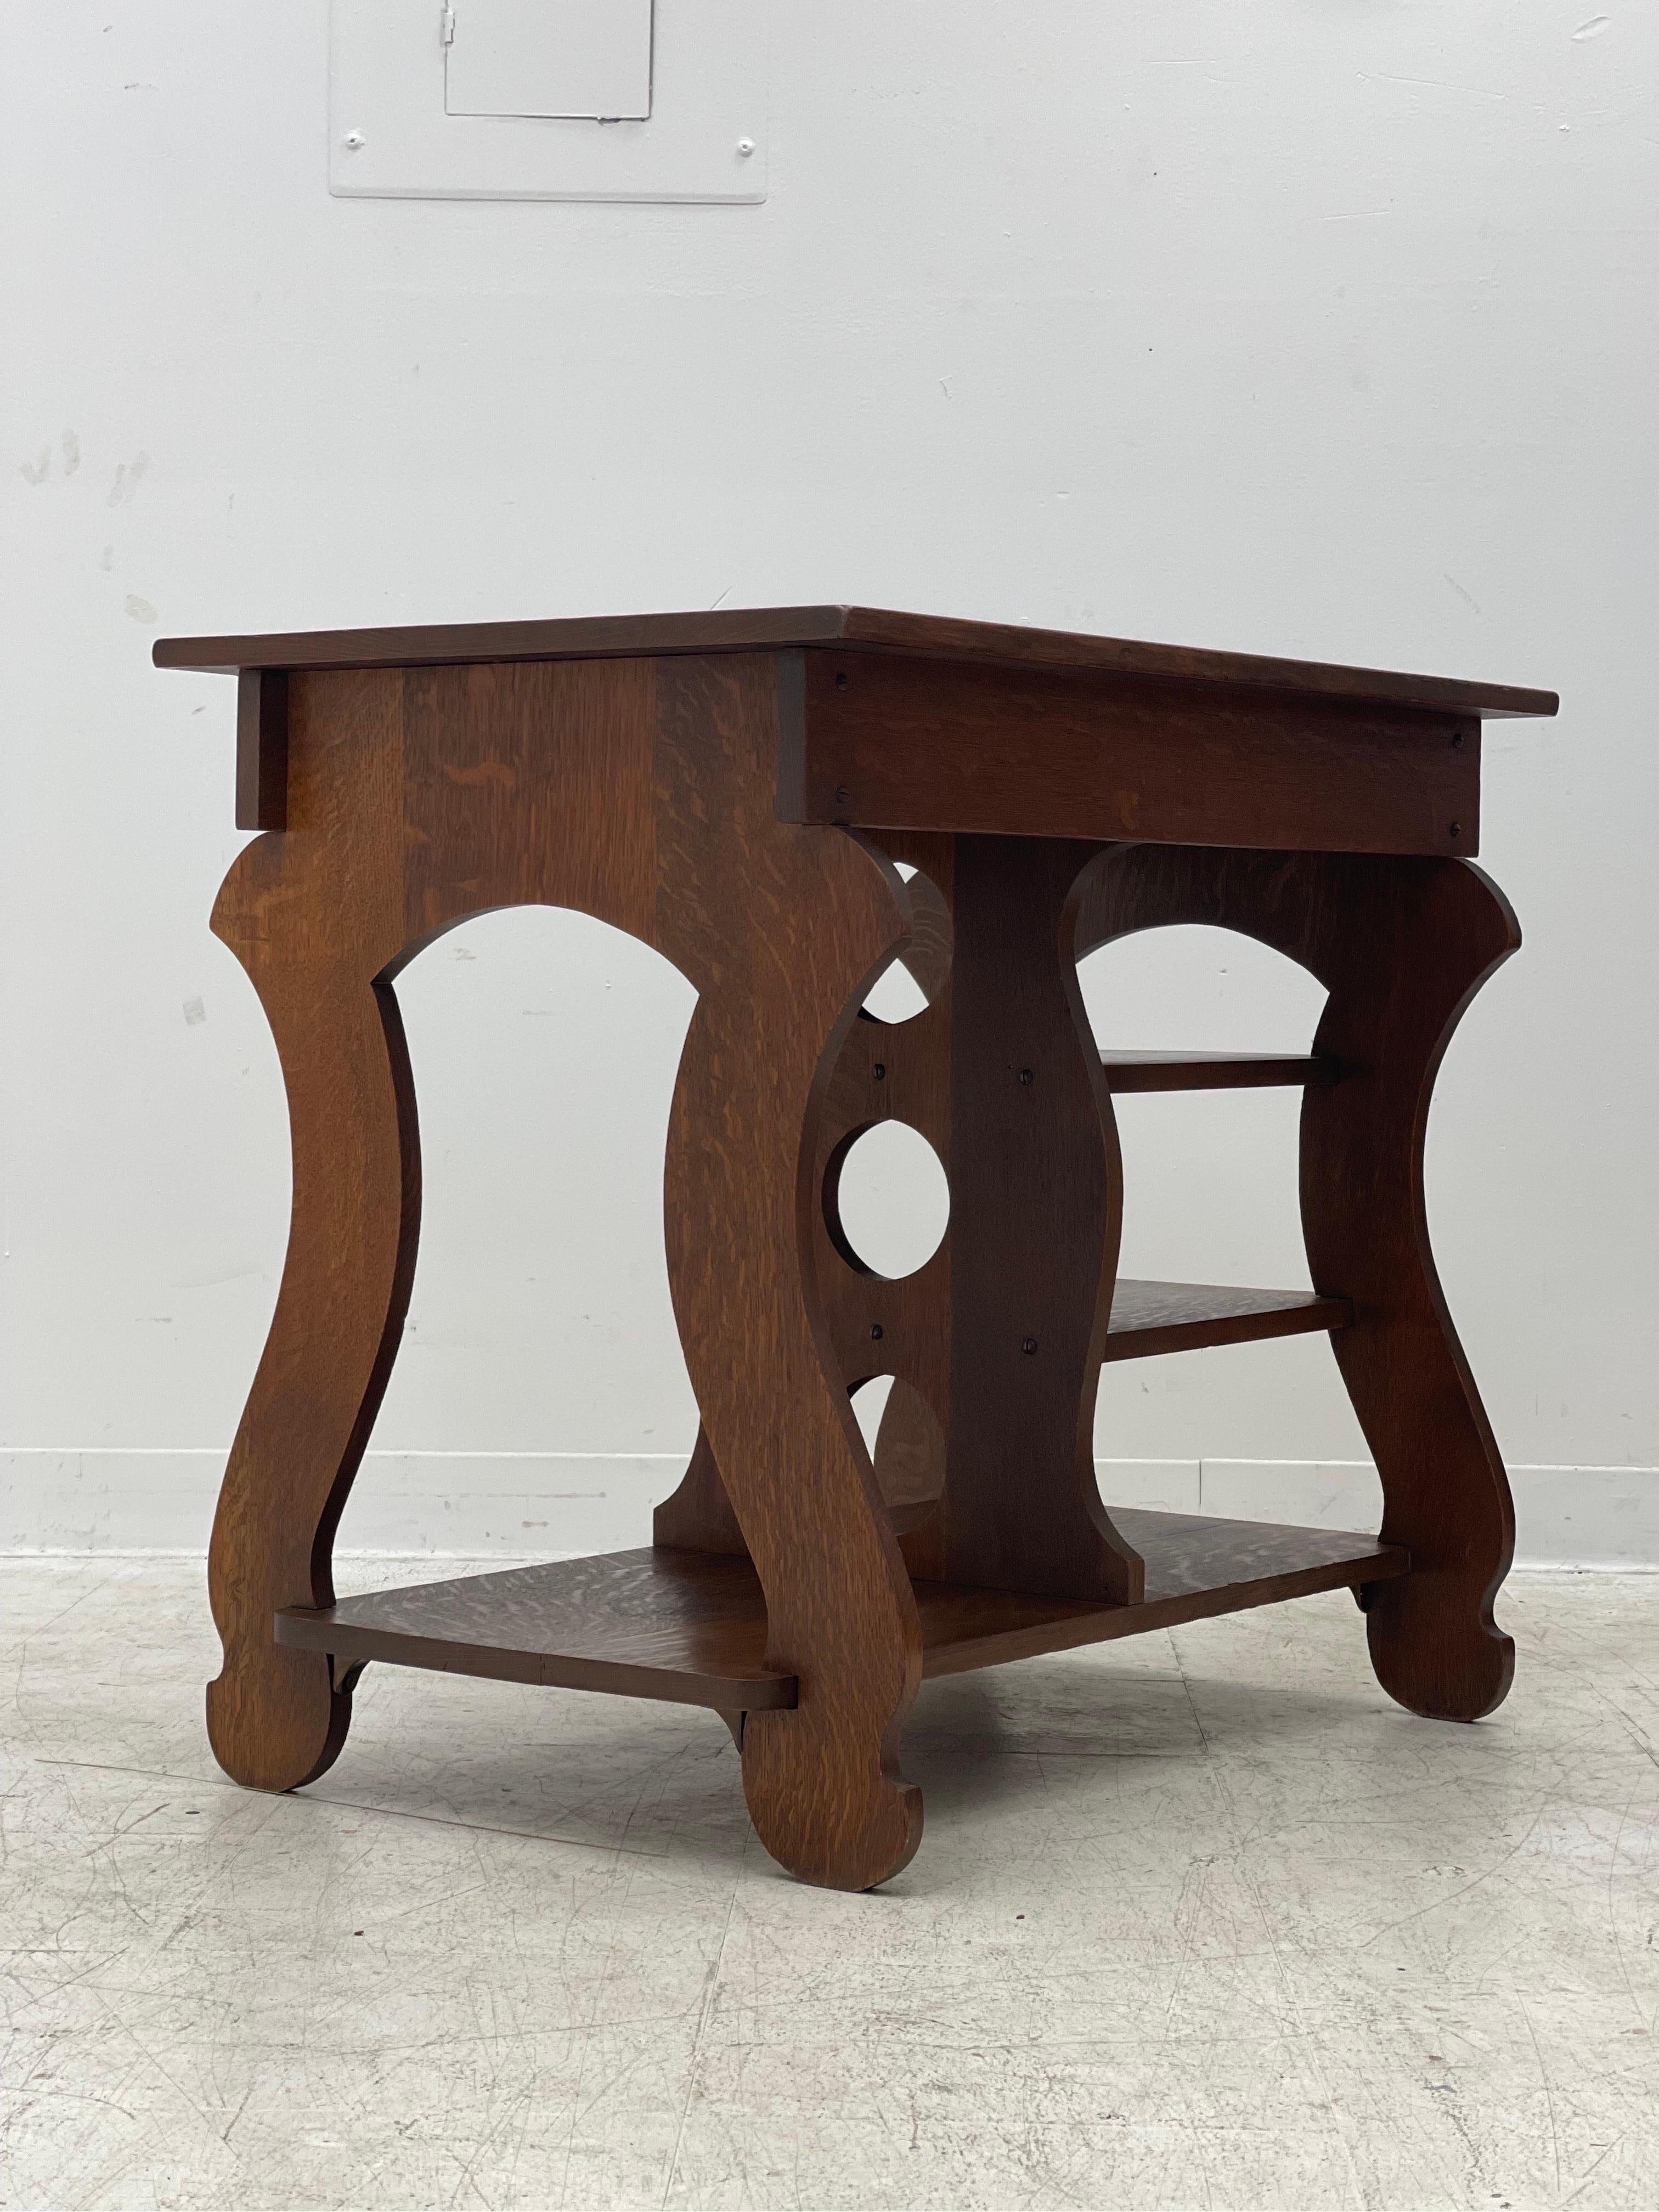 Vintage English import desk/console table with figured wood 

Dimensions. 34 W ; 29 1/2 H ; 22 D.